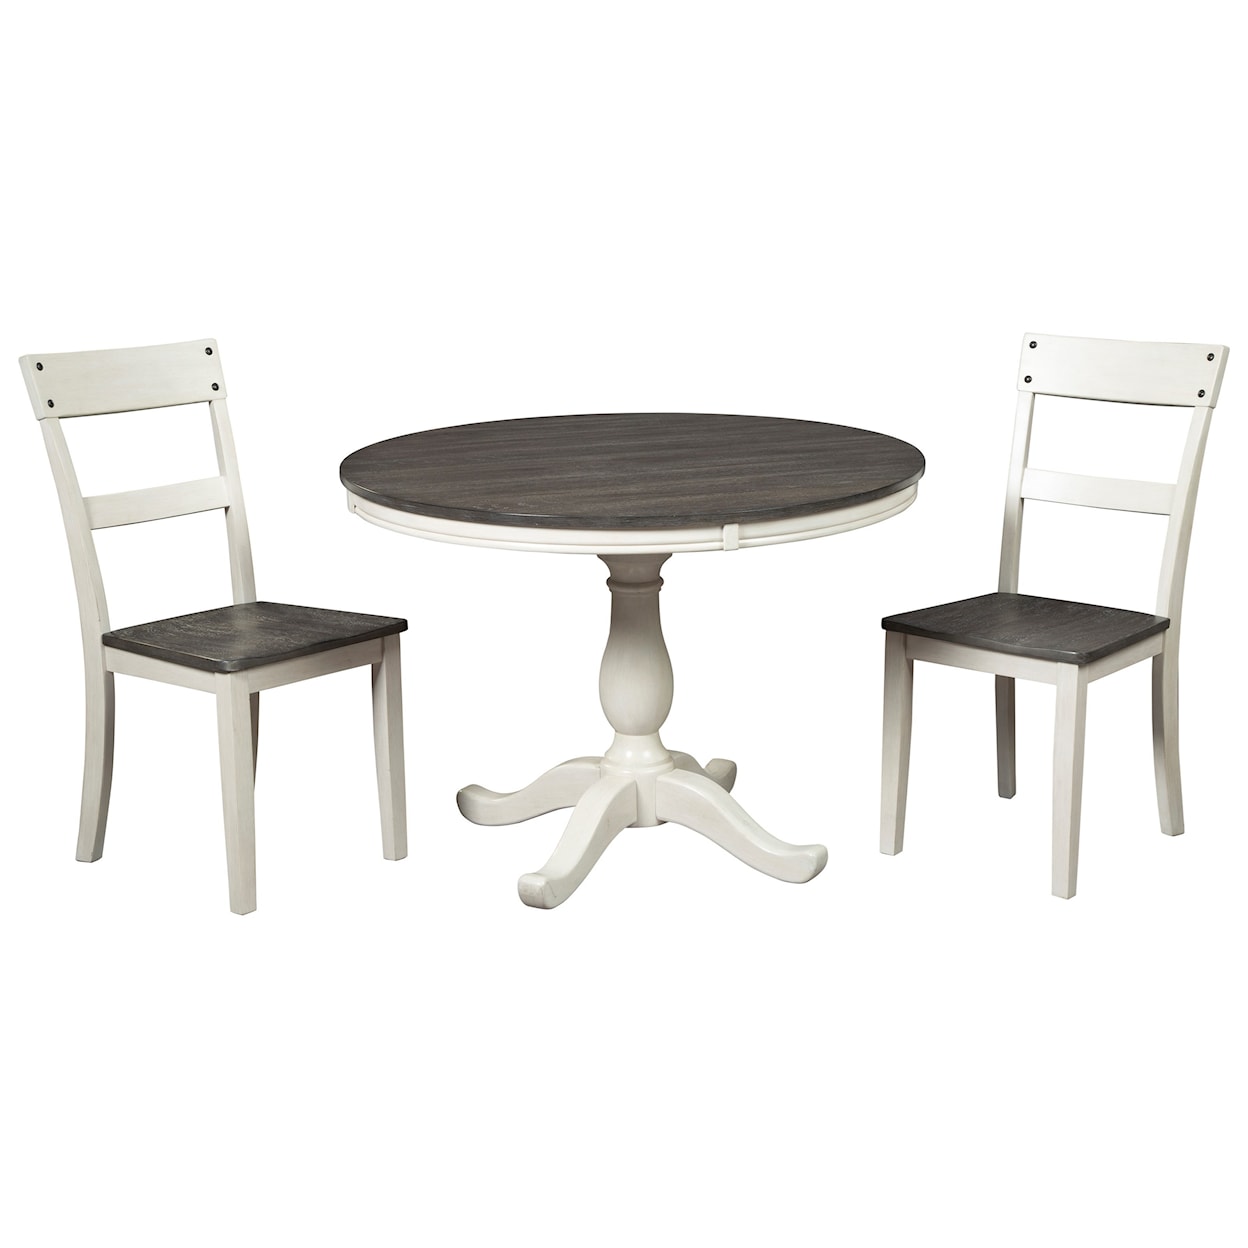 Michael Alan Select Nelling 3-Piece Round Dining Table Set